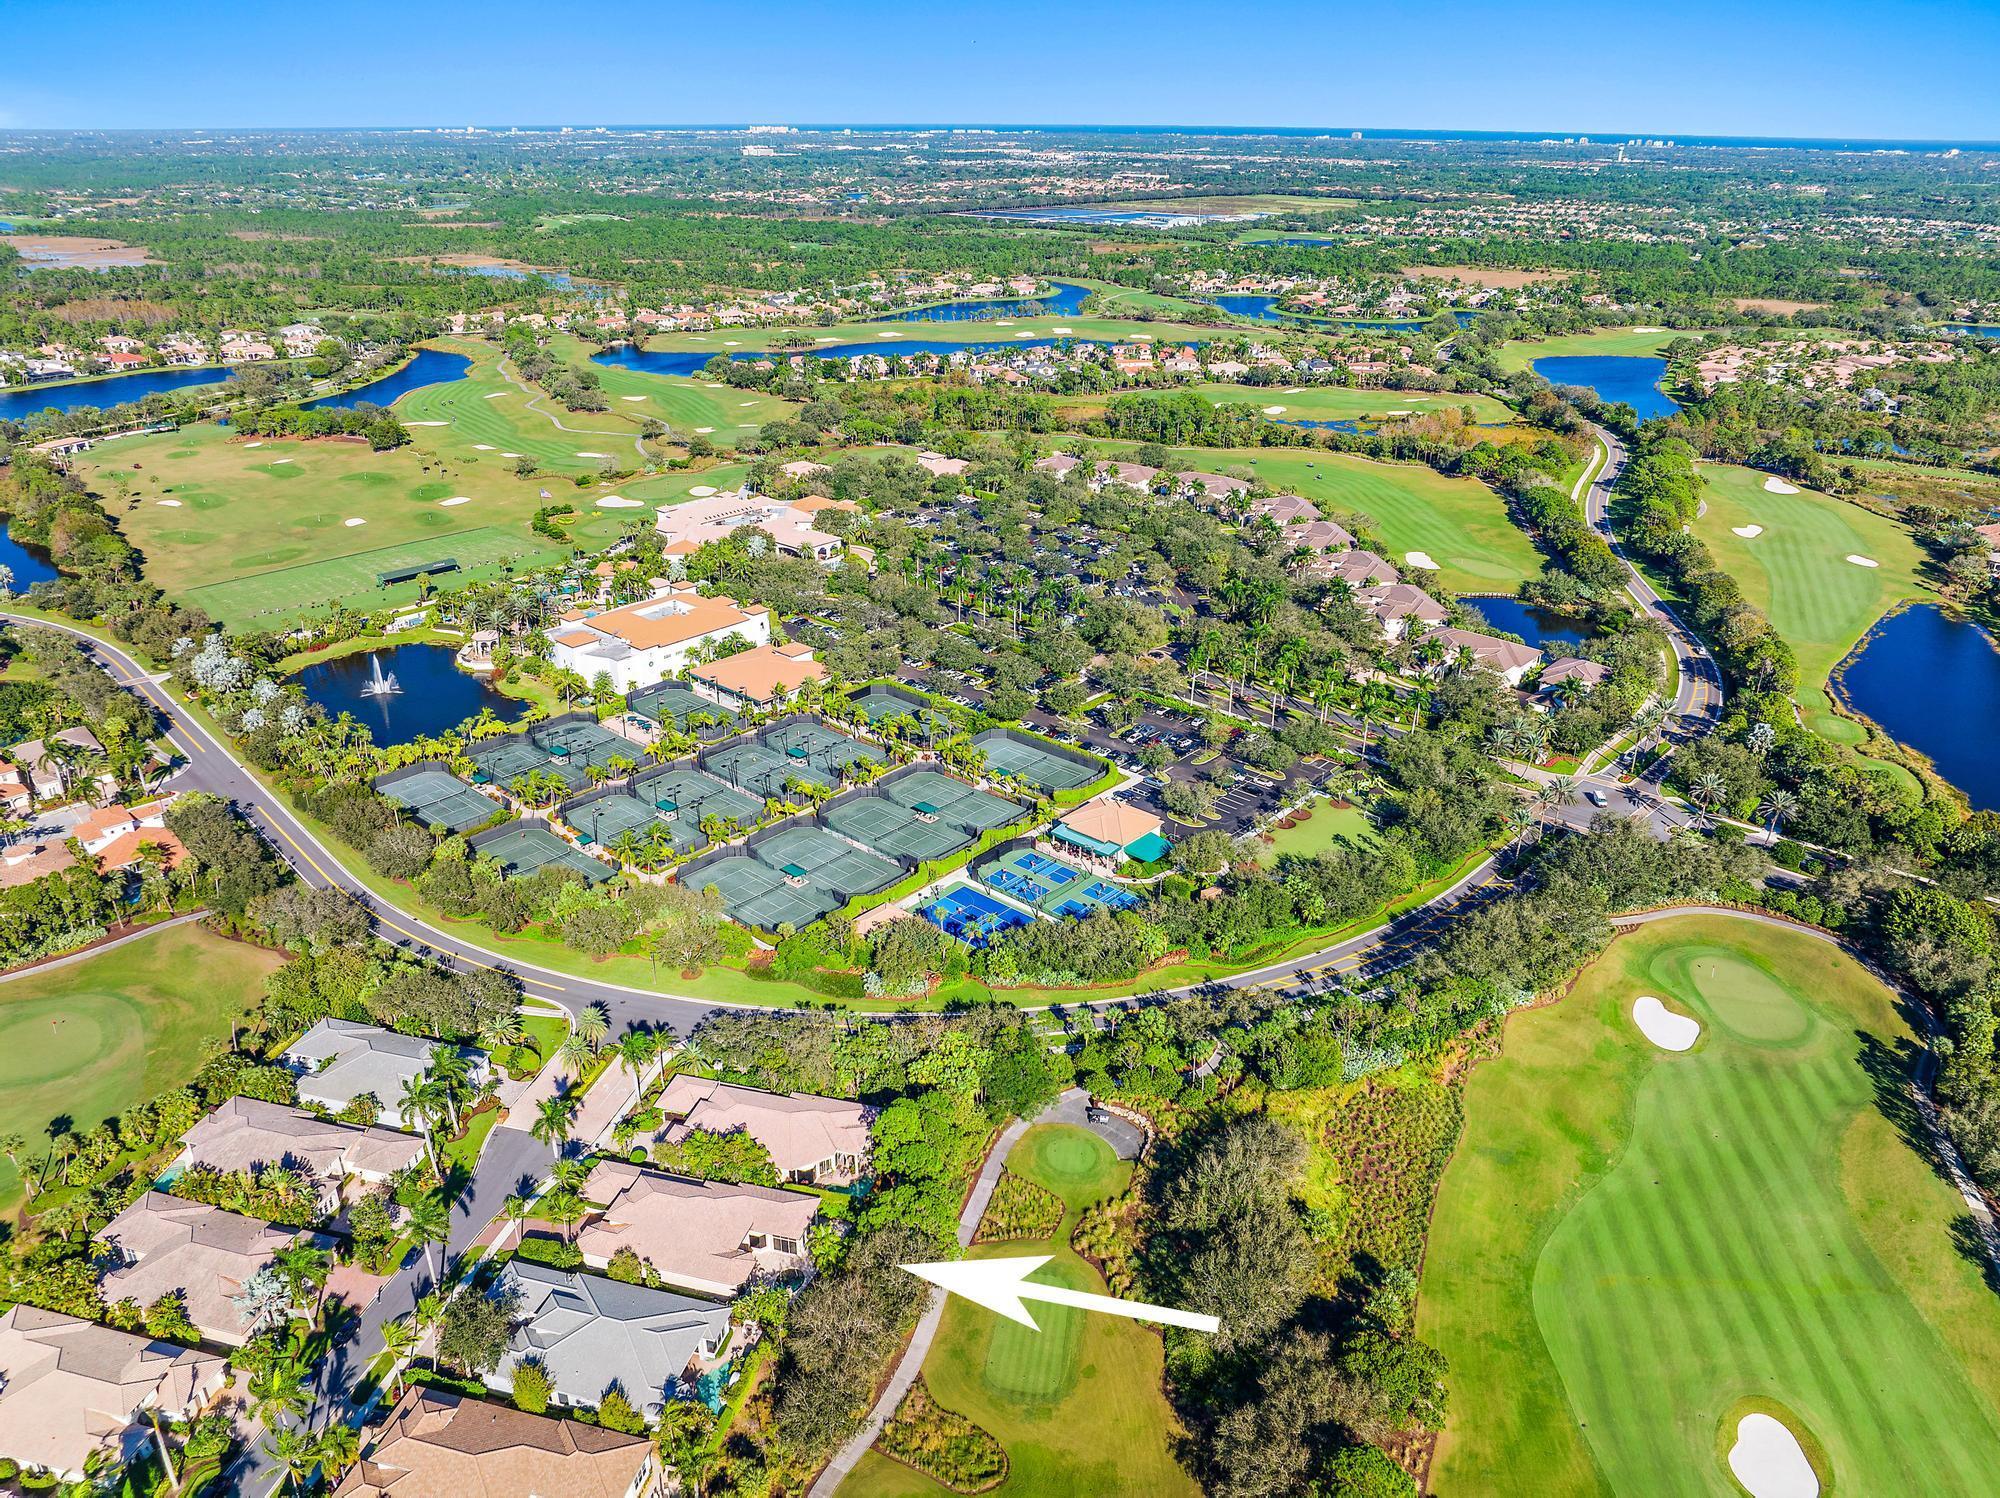 FULL GOLF MEMBERSHIP and extremely close proximity to the club and all amenities that the award-winning Country Club at Mirasol has to offer: Golf, fitness, dining, pool(s), tennis, pickleball, kids club.  Photos with furnishings are virtually staged.  Take advantage of this very, very rare opportunity to own a single-story residence on Via Florenza. Two-car garage plus golf cart garage, open spacious floor plan offering 3BR/3.1BA and a spacious office/den.  Gracious primary suite with beautifully appointed custom-built closets.  The rear southern exposure enjoys sunlight all afternoon on the swimming pool and patio while the covered outdoor area provides a shaded space for seating with an electronic screen creating a most desirable outdoor living ambiance.  Downsview kitchen - Sub-Zero.. refrigerator and additional refrigeration and freezer drawers, induction cook top, pantry pull-outs and soft-close cabinet doors and drawers.  Open kitchen, separate bar area and open spaces make this home perfect for entertaining.  A rare opportunity in Mirasol - make this home yours and enjoy one of the finest gated club communities in all of Palm Beach County.